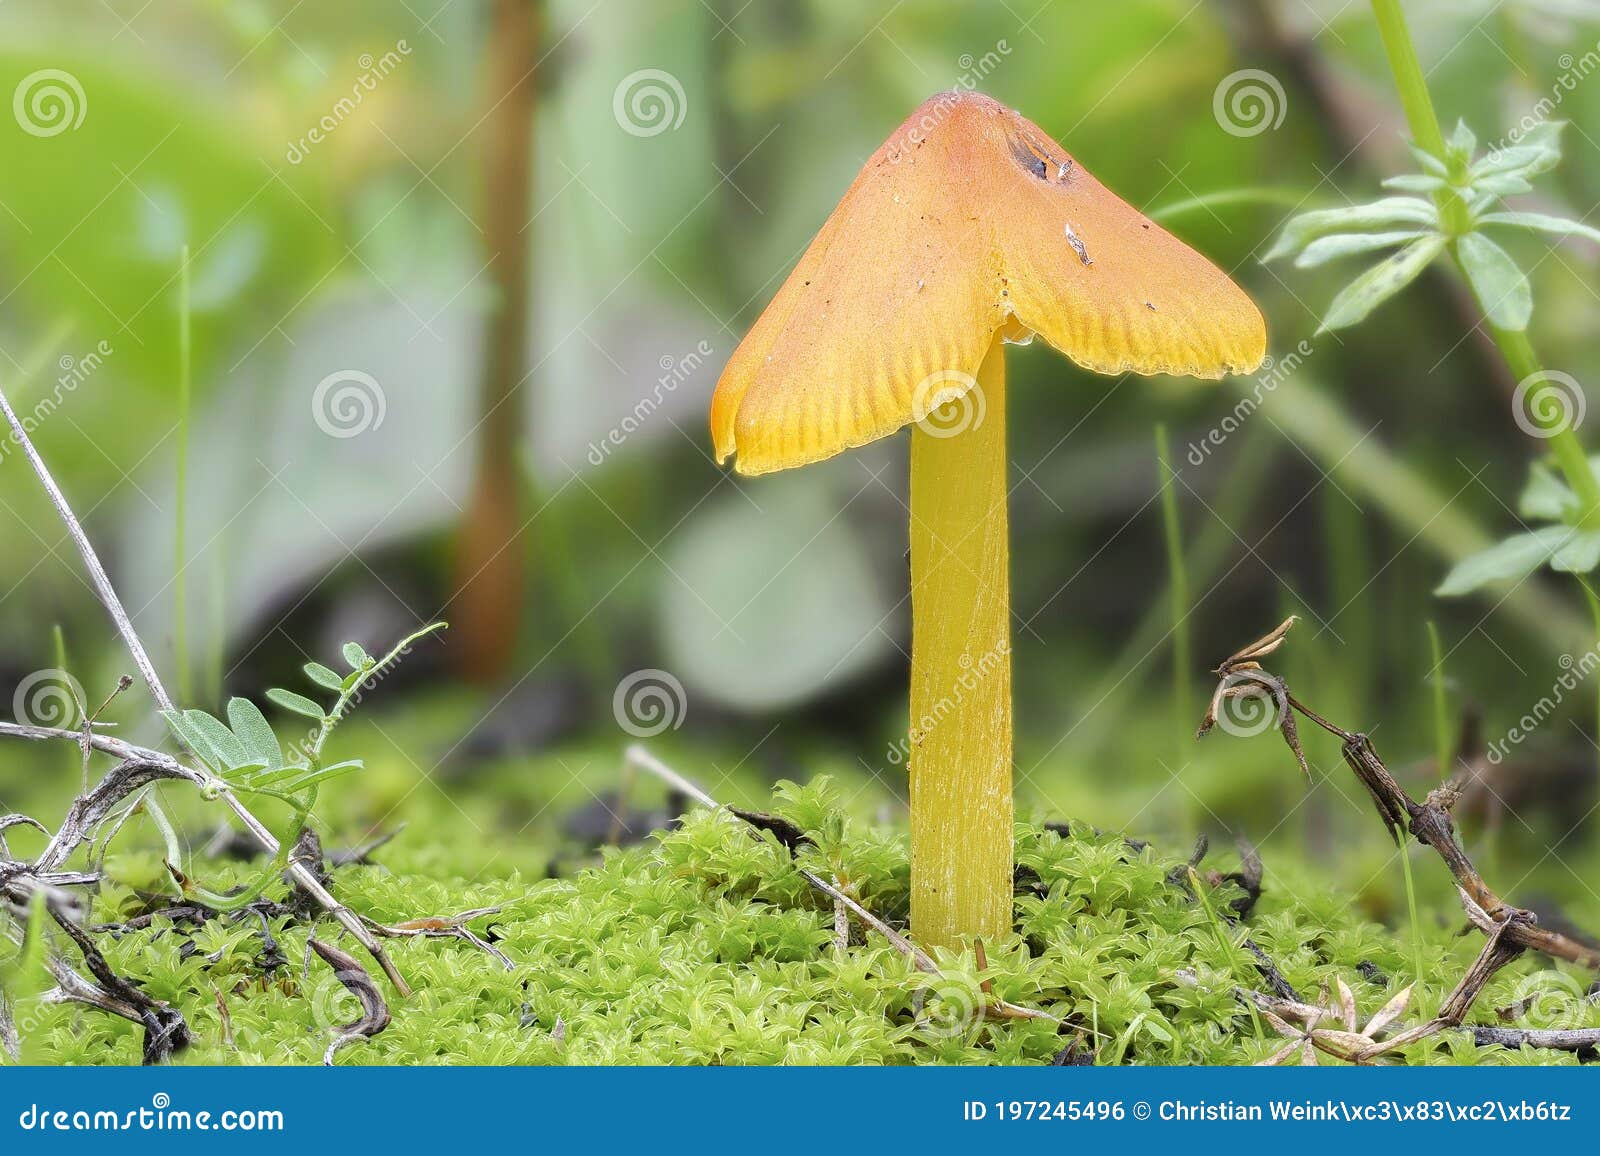 the blackening waxcap hygrocybe conica is an inedible mushroom